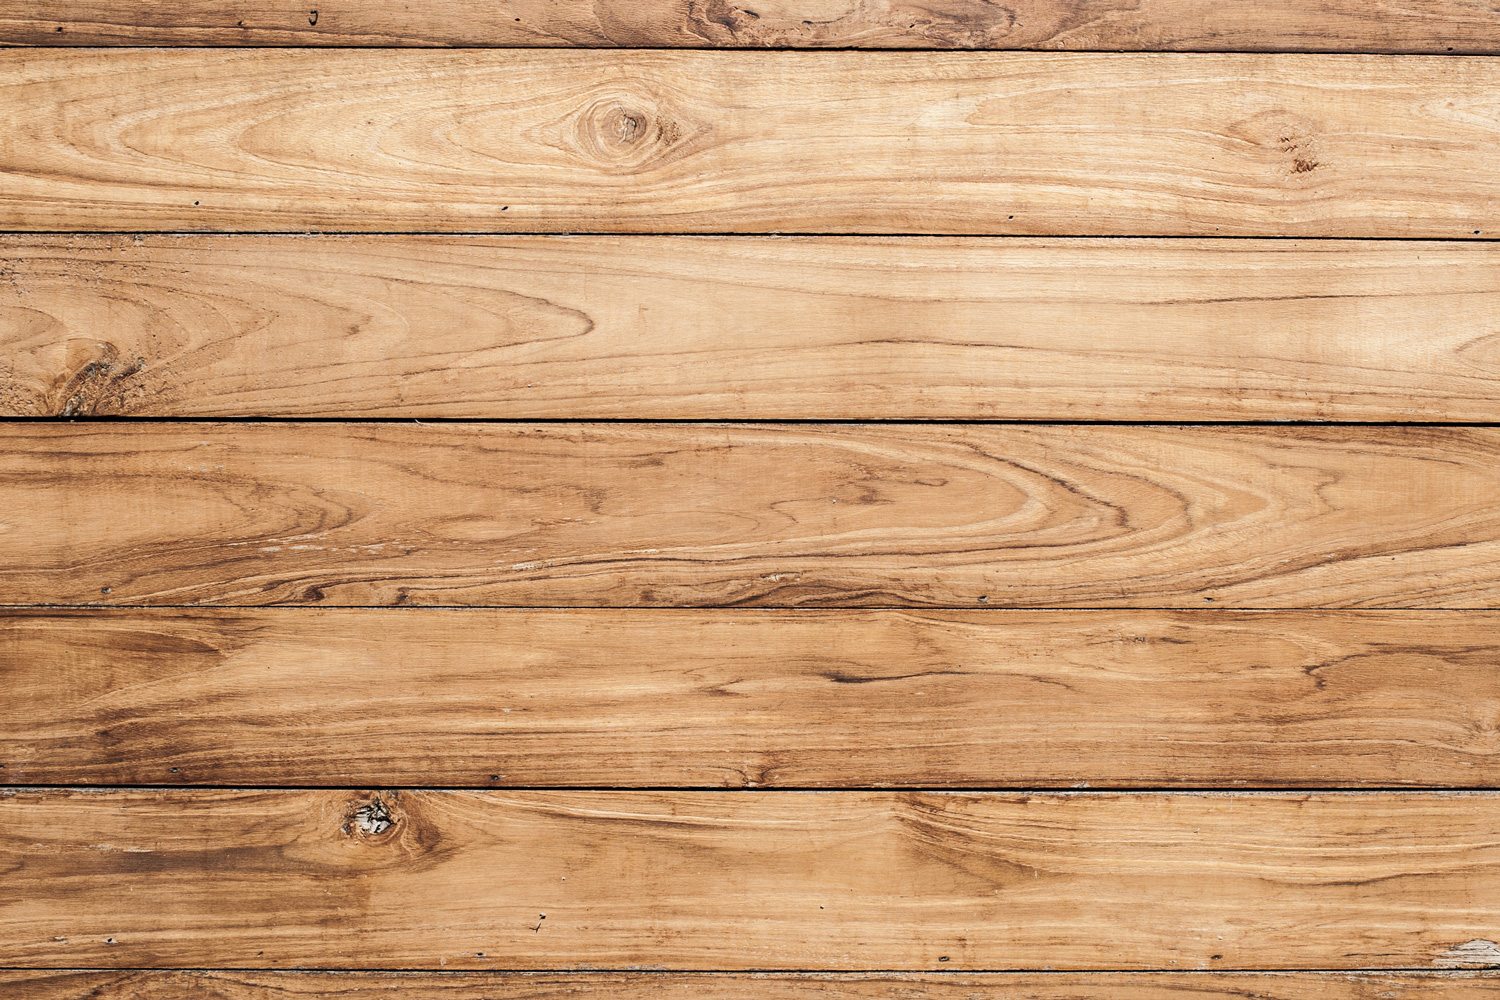 A guide on how to prepare bare wood for painting or staining